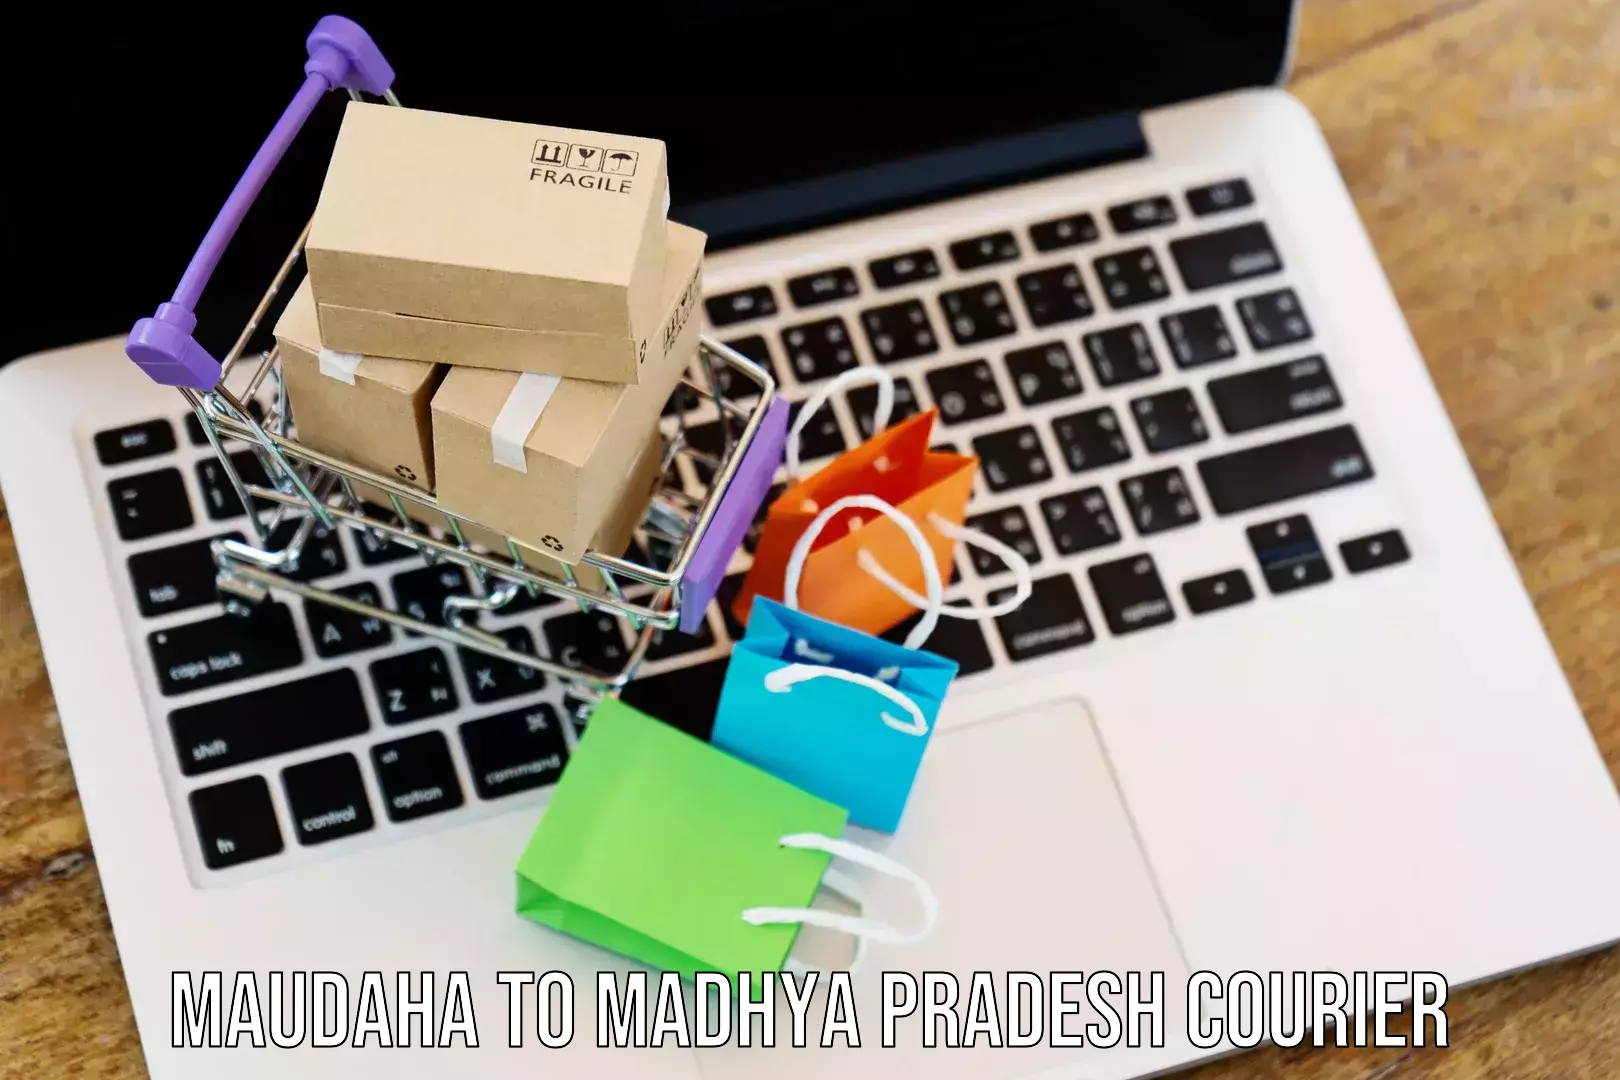 Courier service partnerships in Maudaha to Sehore